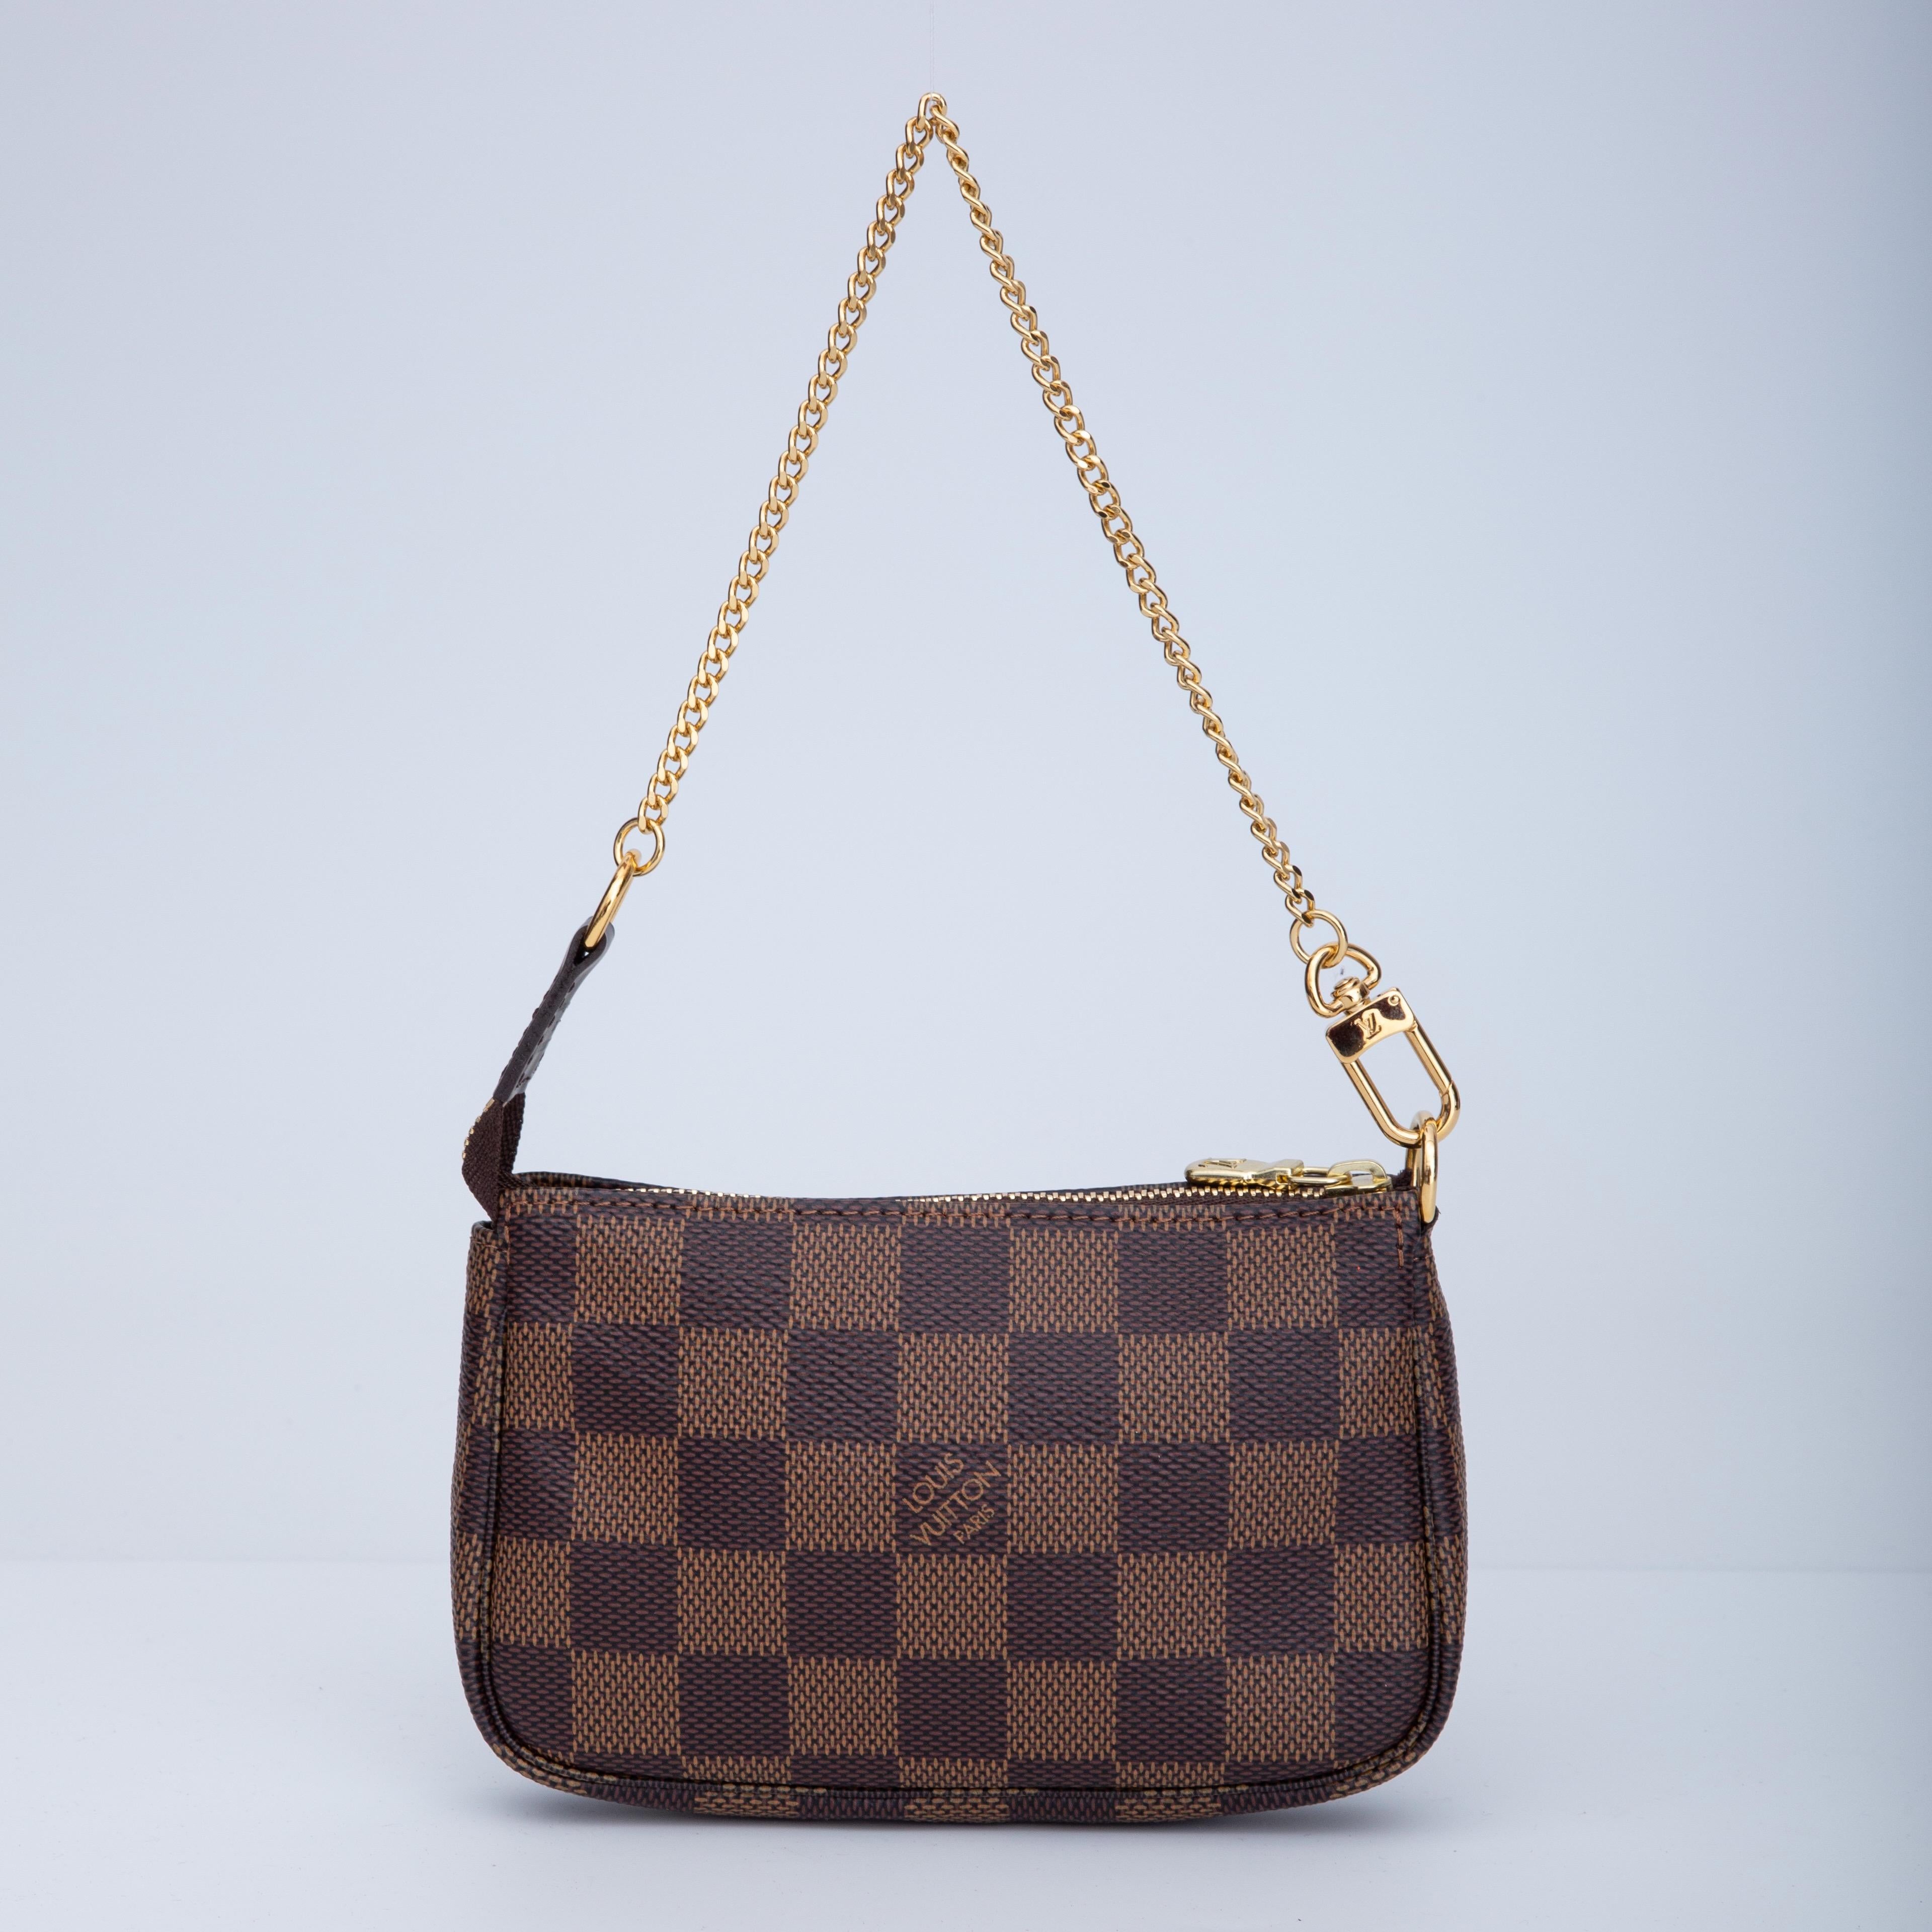 This pochette is made of damier eben coated canvas with dark lather finishes. The pochette has a thin polished gold chain strap that can attach to larger handbags. The top zipper opens to a red fabric interior.

COLOR: Brown/Damier ebene
MATERIAL: